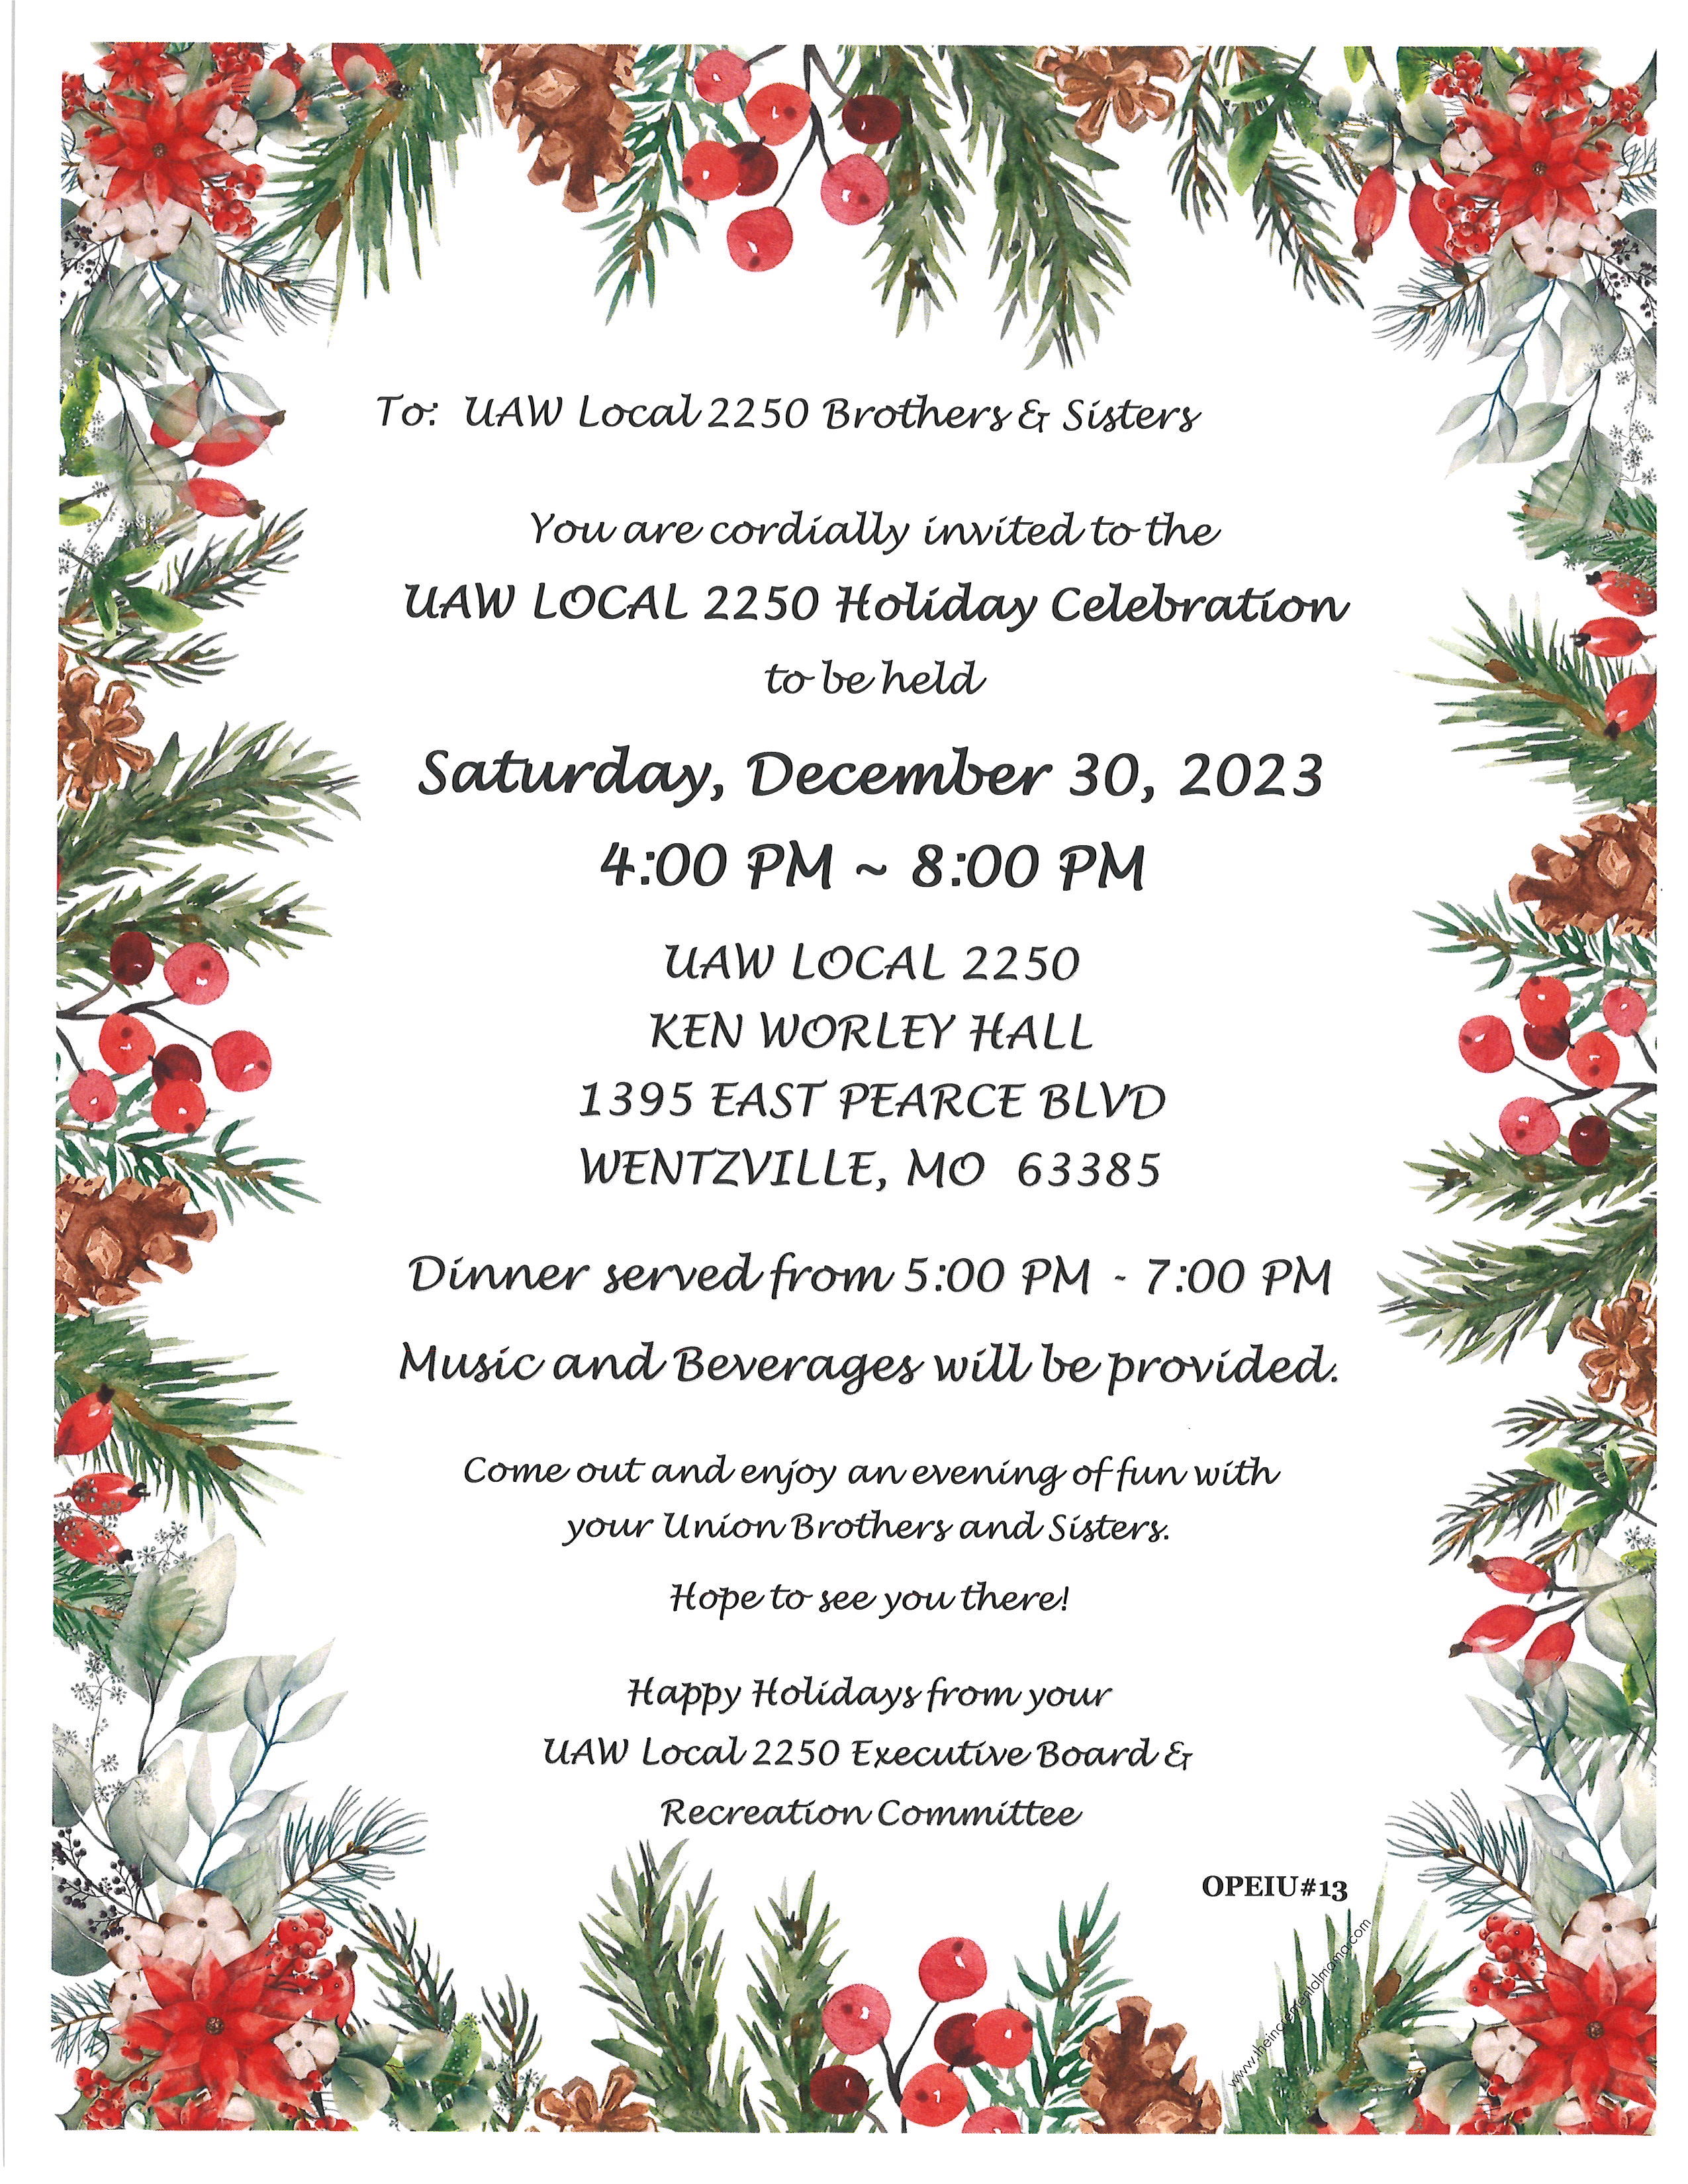 Holiday Celebration At THe Hall! | UAW Local 2250